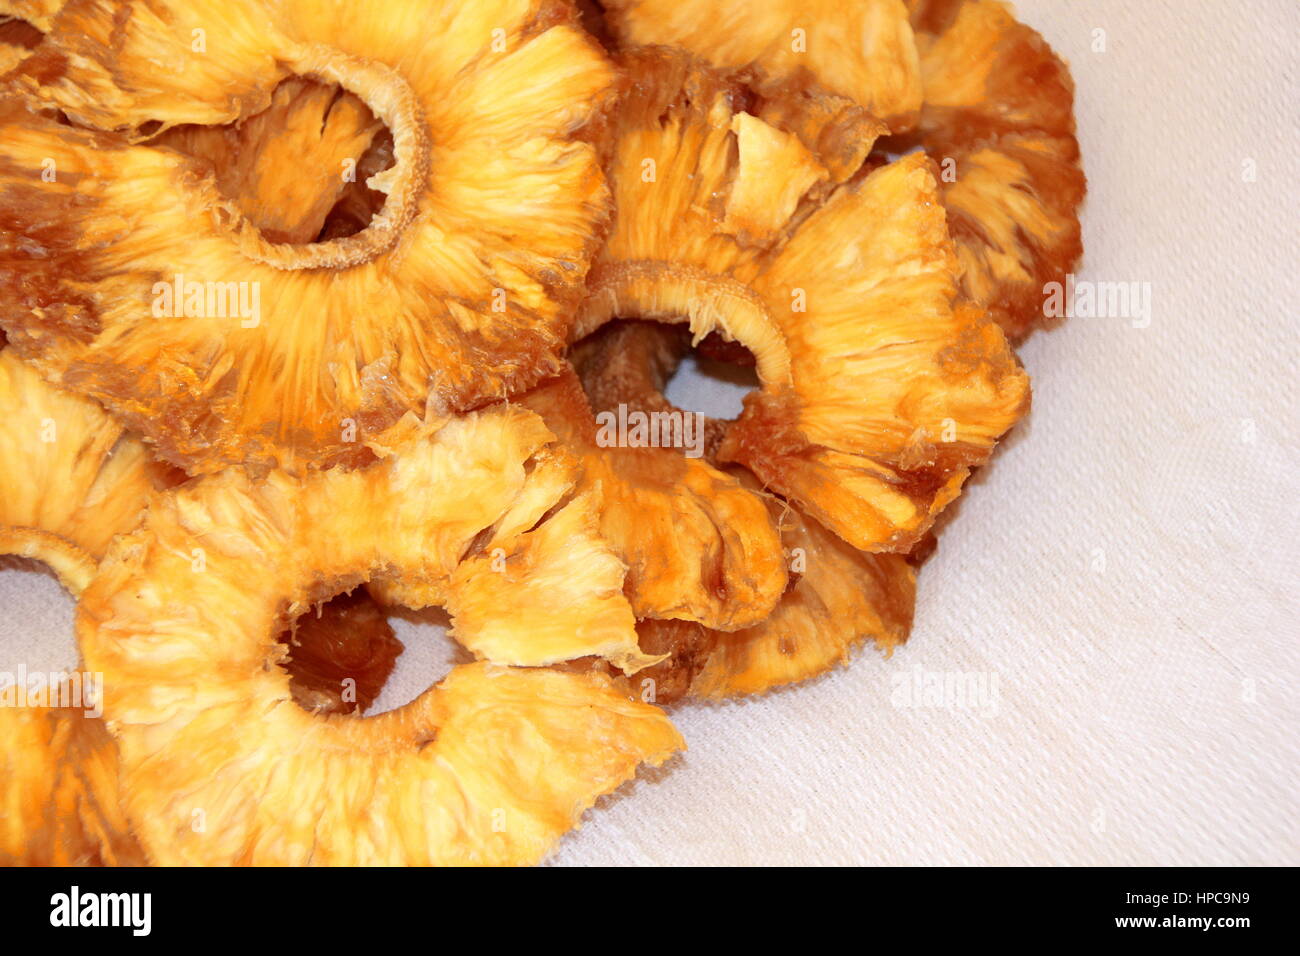 Dried Pineapple ready to eat Stock Photo